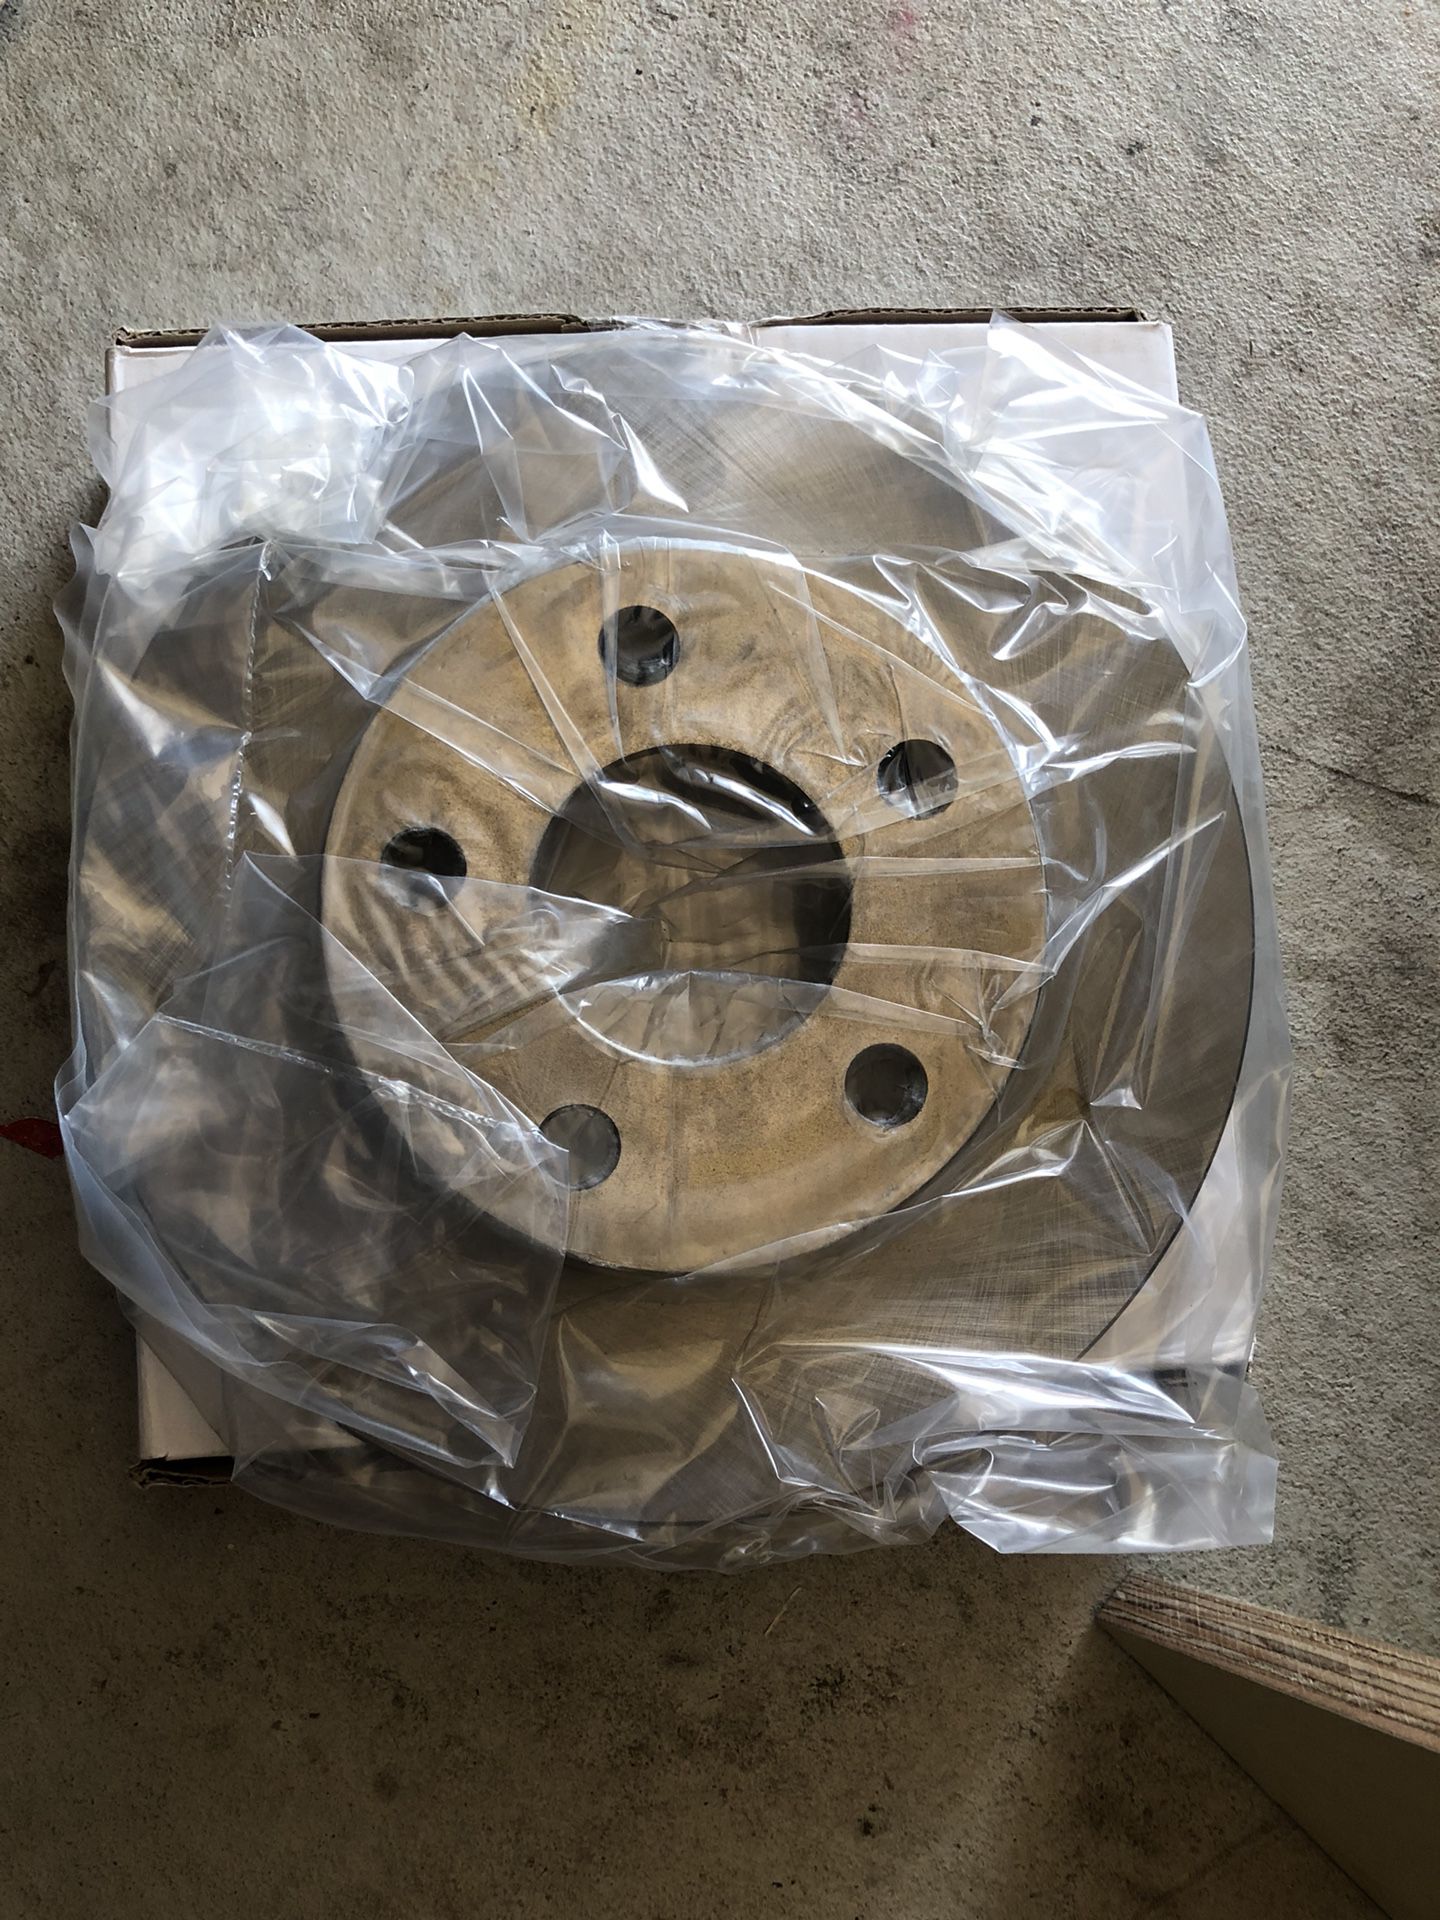 Disc and coupling with the break pad